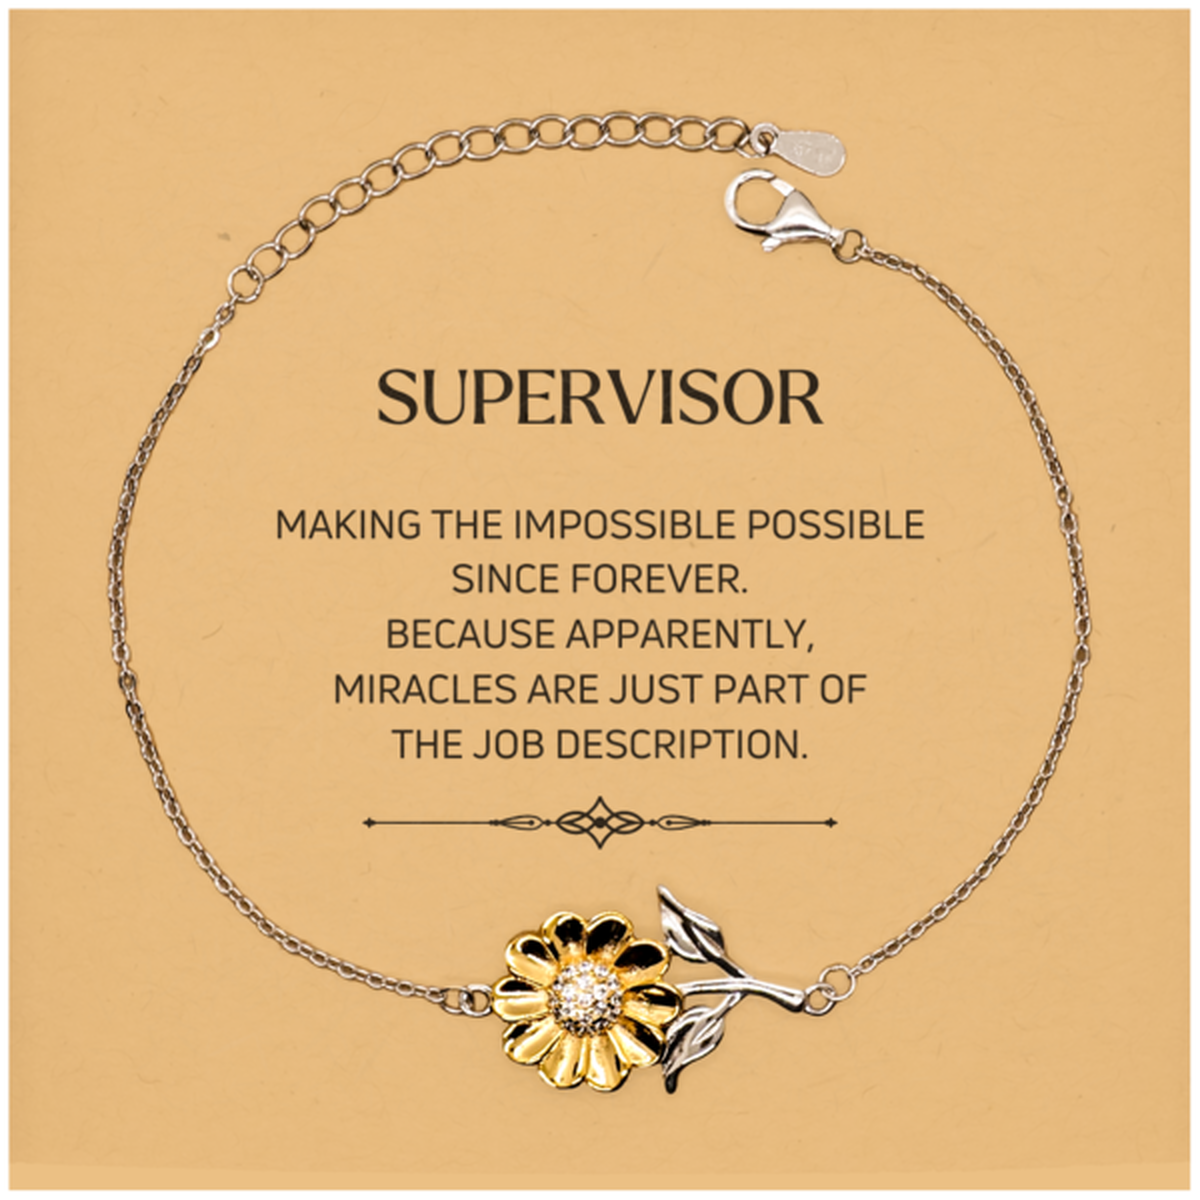 Funny Supervisor Gifts, Miracles are just part of the job description, Inspirational Birthday Christmas Sunflower Bracelet For Supervisor, Men, Women, Coworkers, Friends, Boss